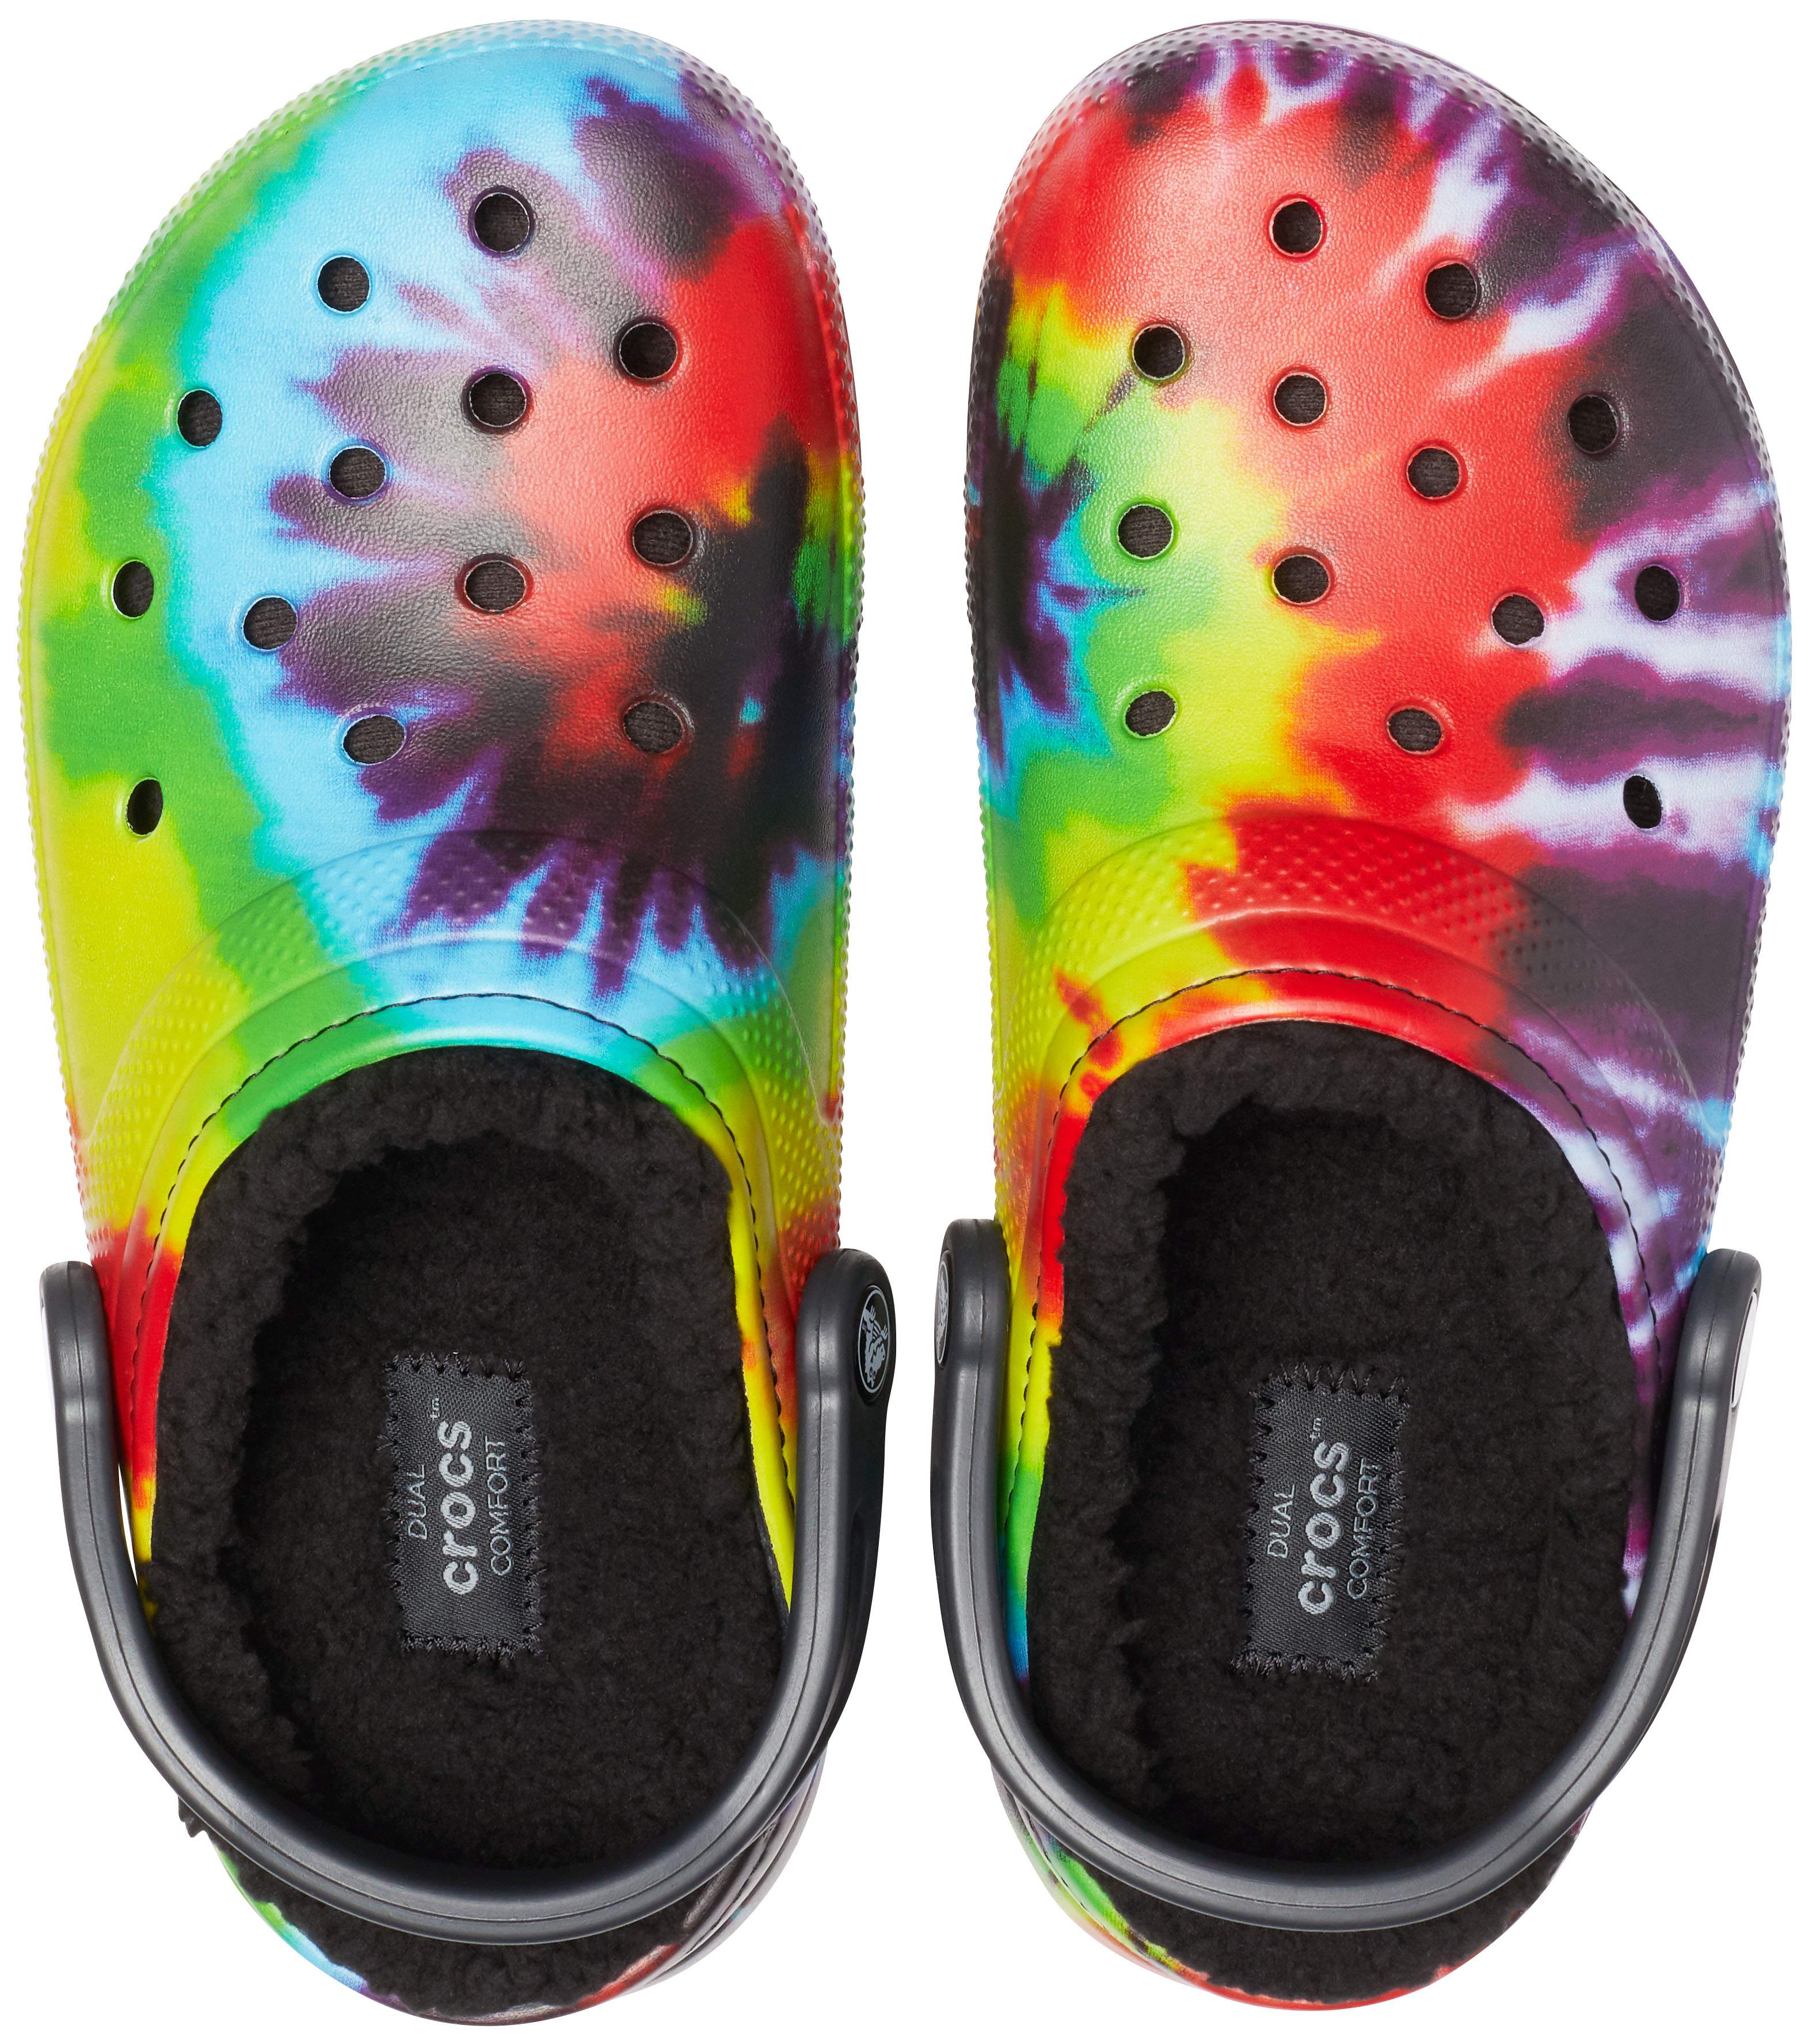 colorful crocs with fur